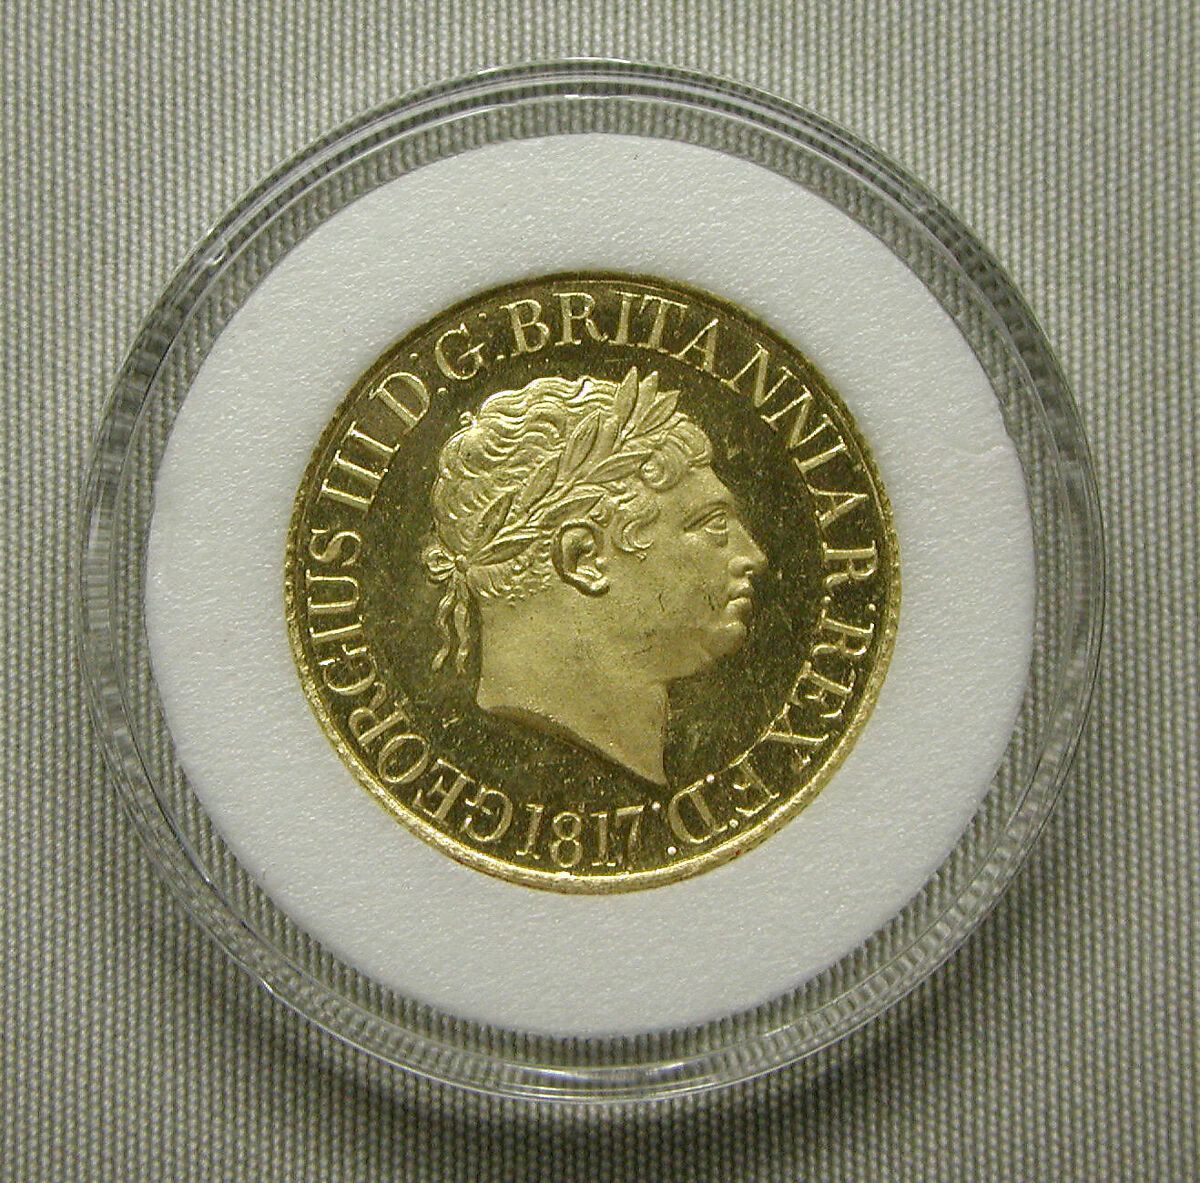 Proof sovereign of George III, Medalist: Benedetto Pistrucci (Italian, 1783–1855, active England), Gold, British 